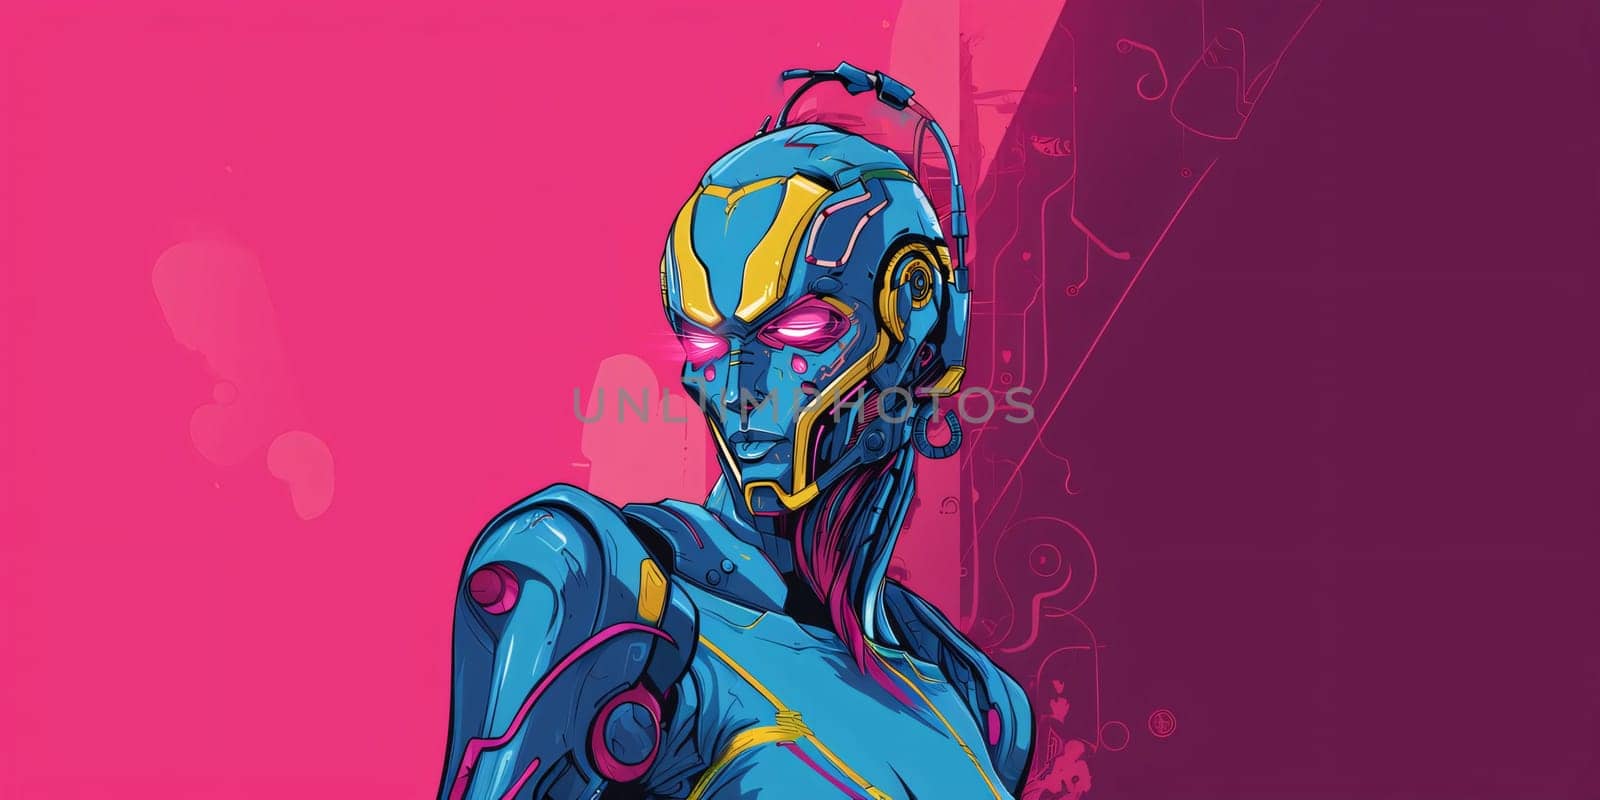 Banner: Illustration of a female cyborg on pink background with copy space